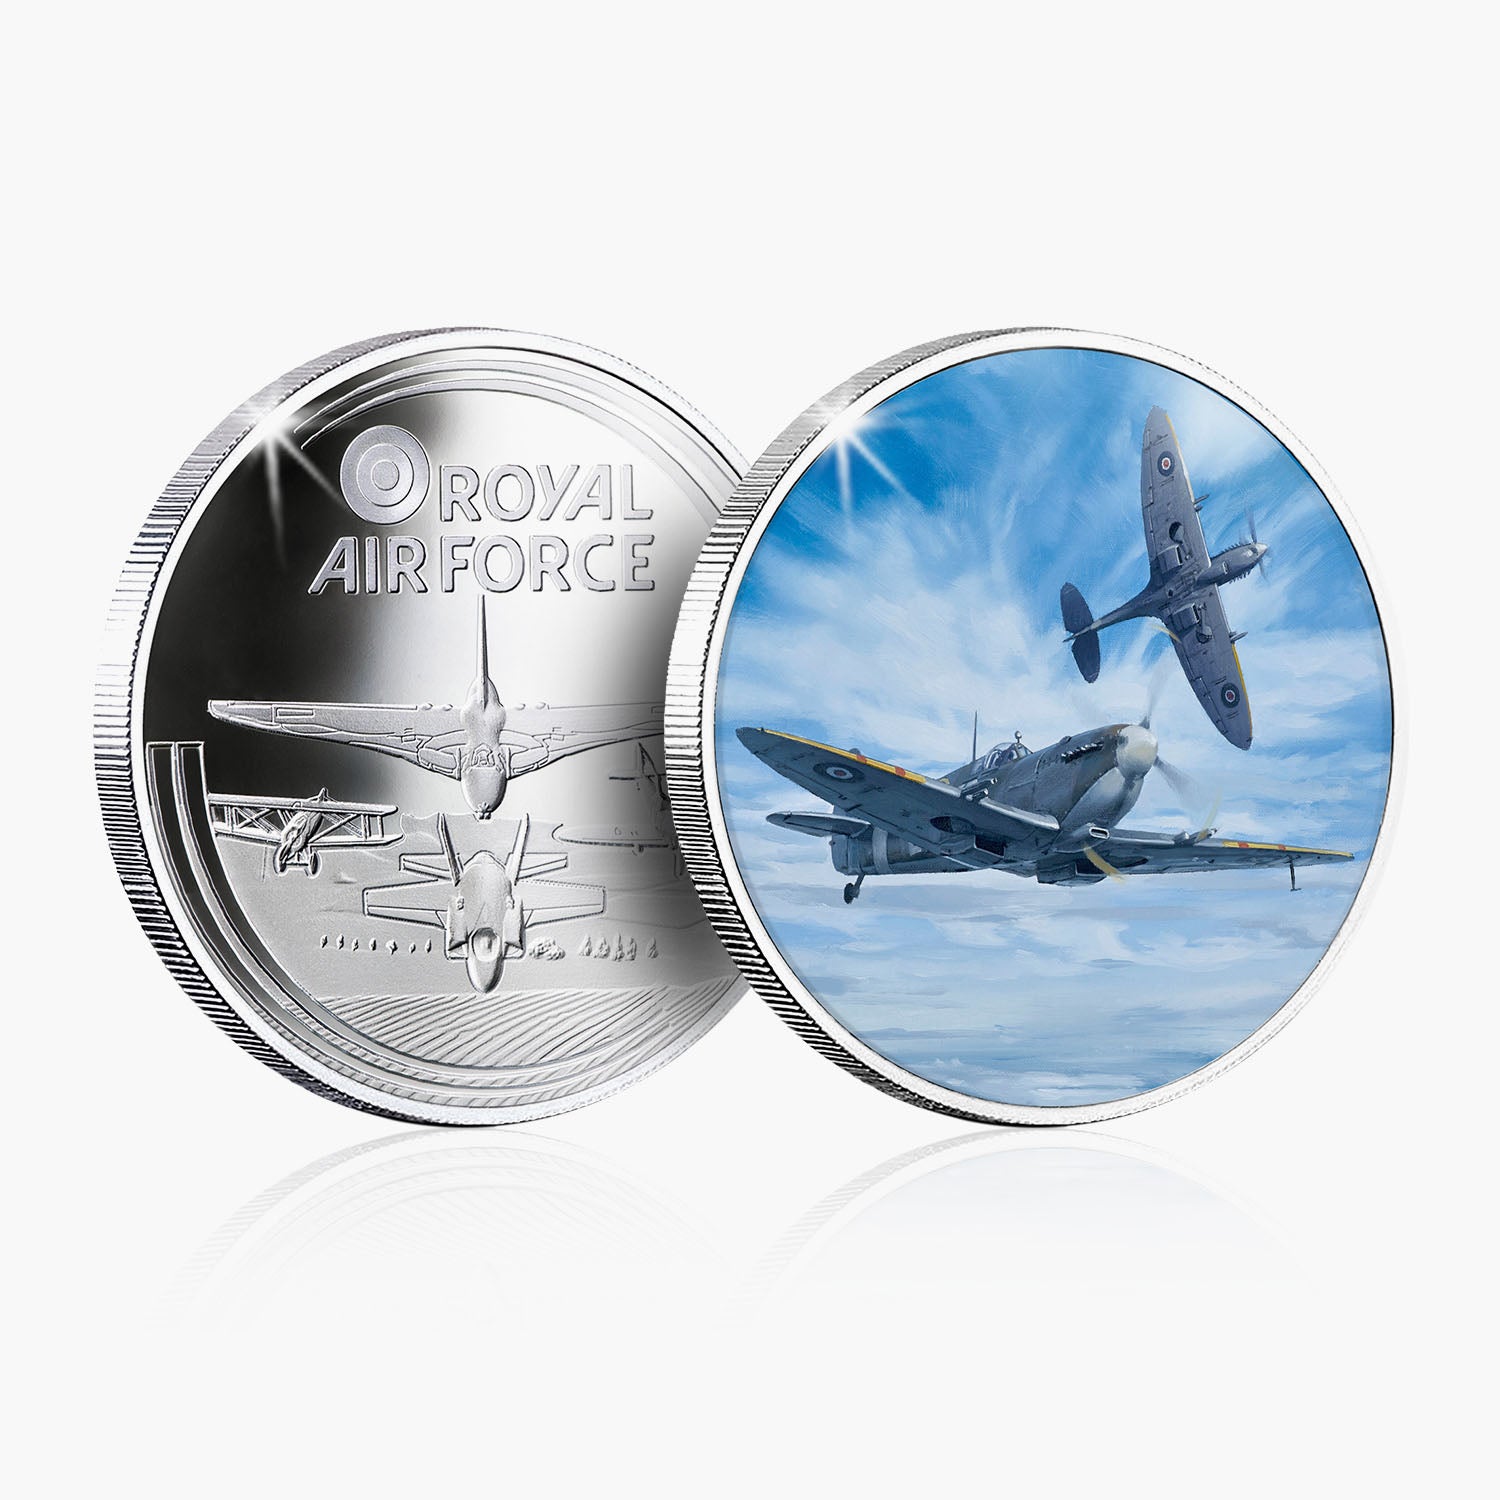 Champion Of The Air Silver-Plated Commemorative